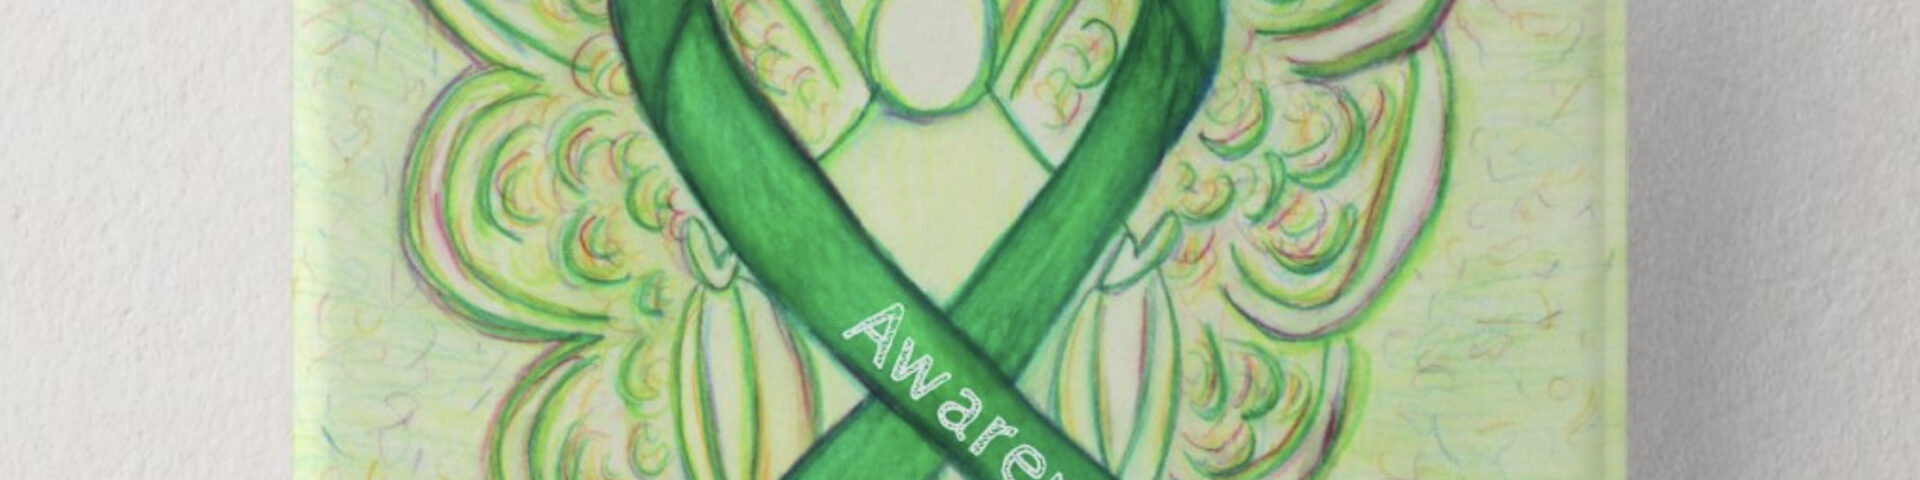 Adrenal Cancer Awareness Ribbon Buttons and Pins